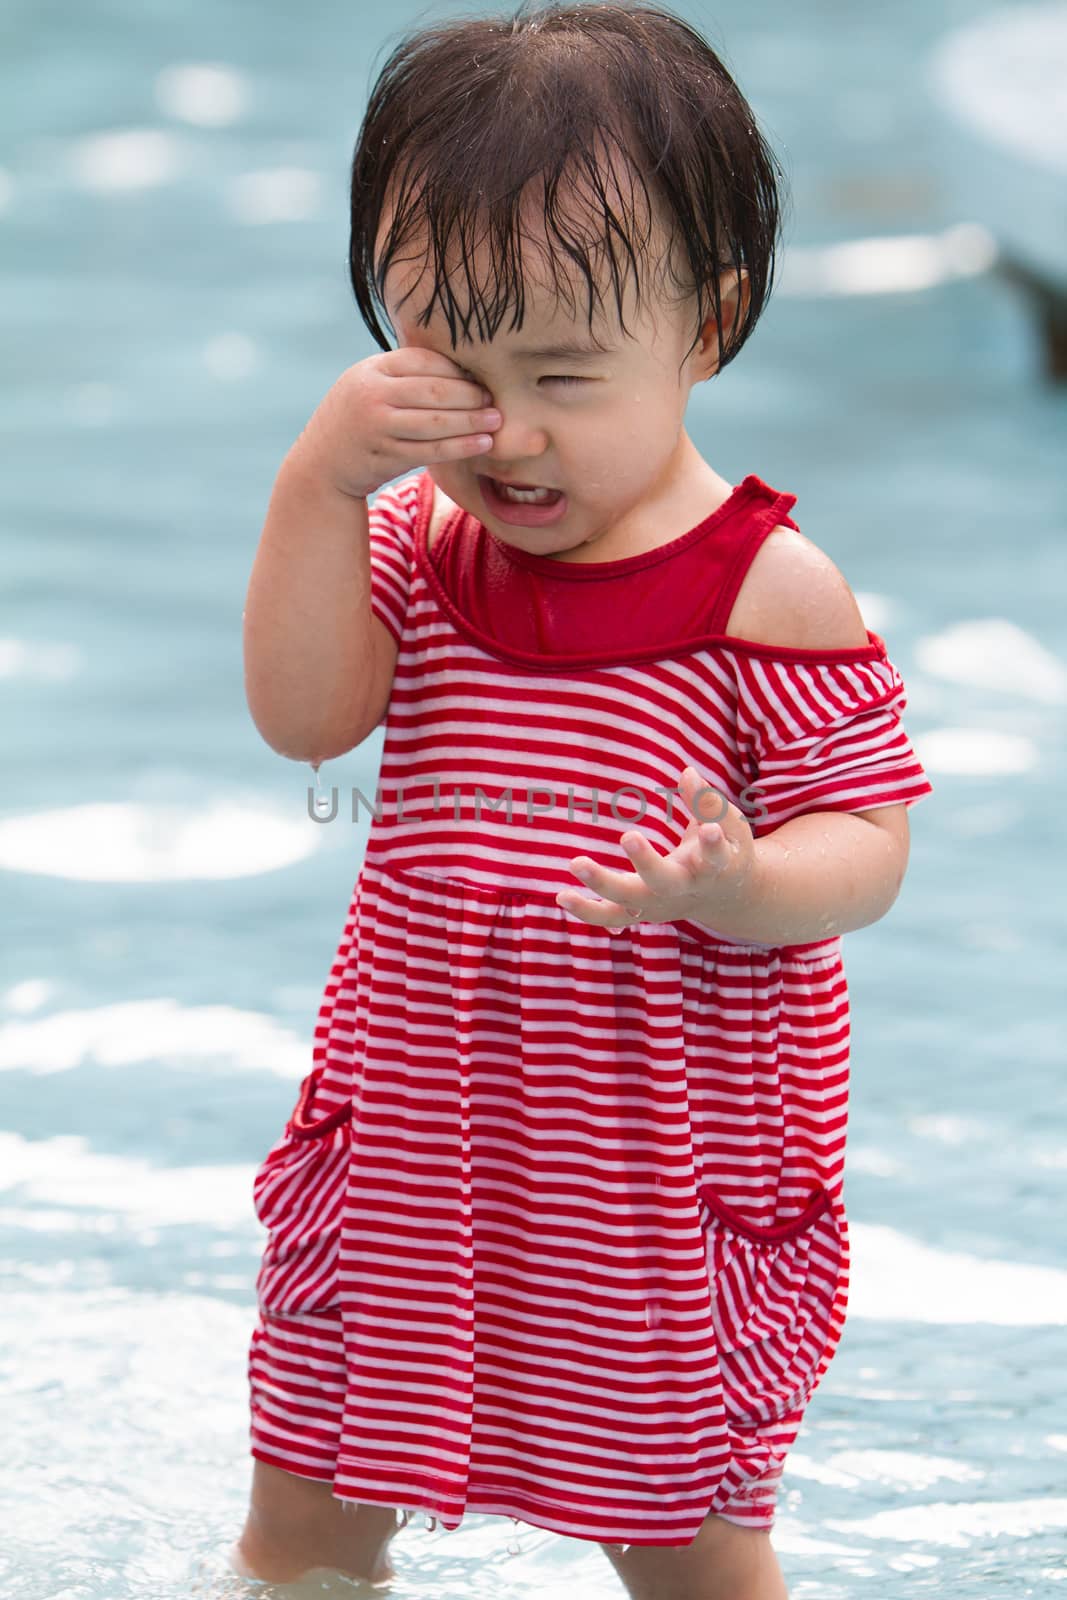 Chinese Little Girl Playing in Water by kiankhoon